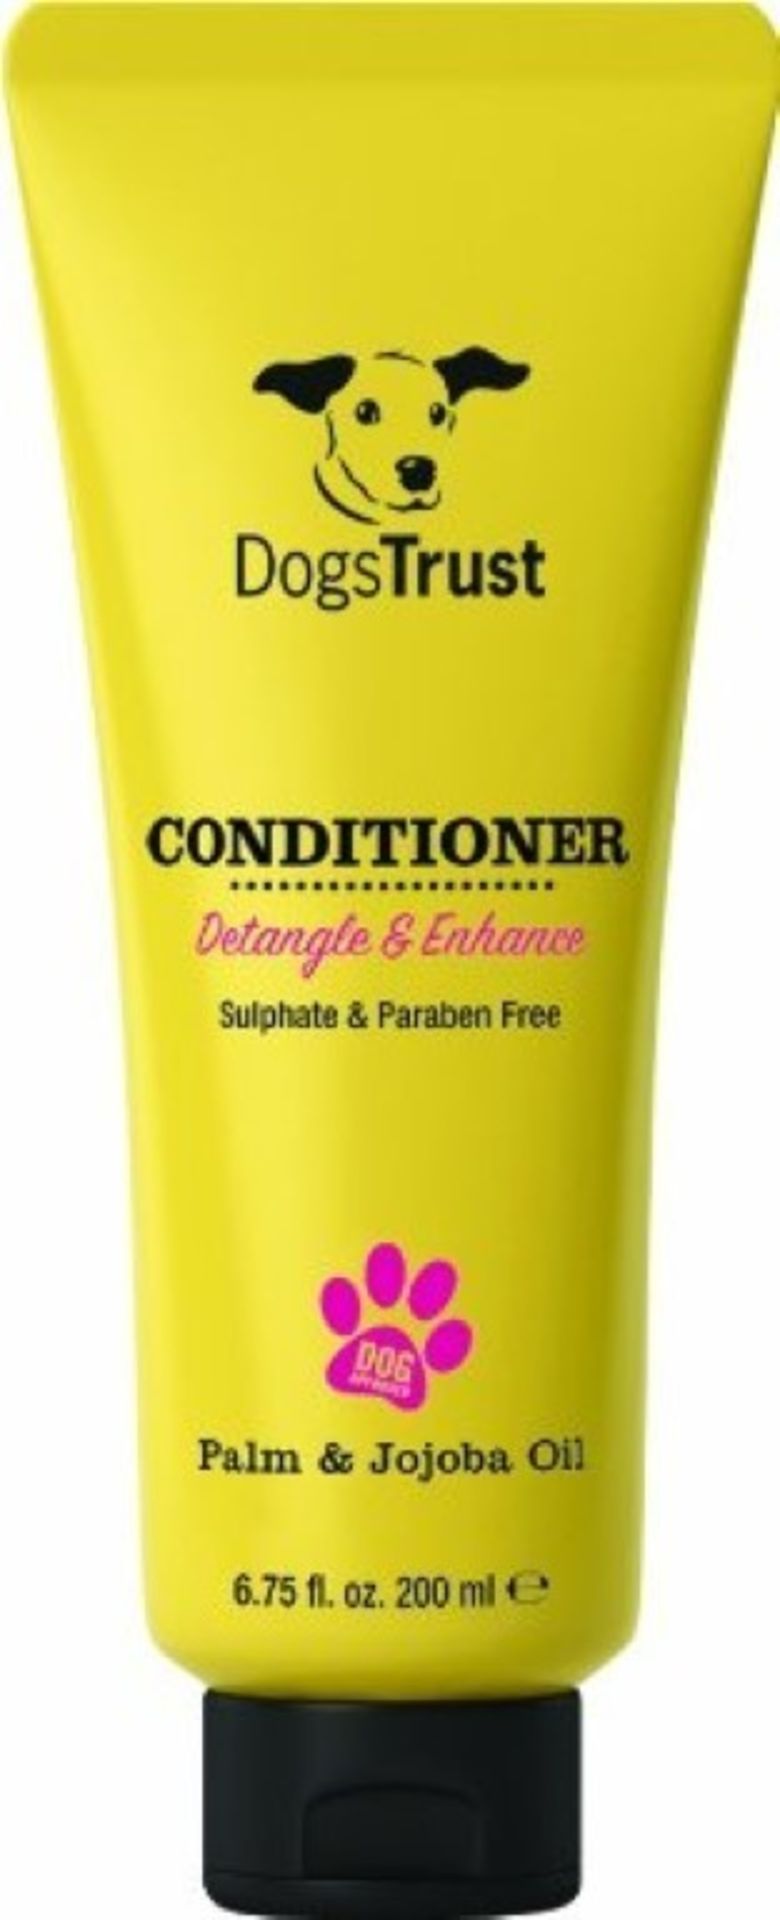 60 x Various Dogs Trust Shampoos and Conditioners - Brand New Stock - CL028 - Includes No Tears, - Image 2 of 15